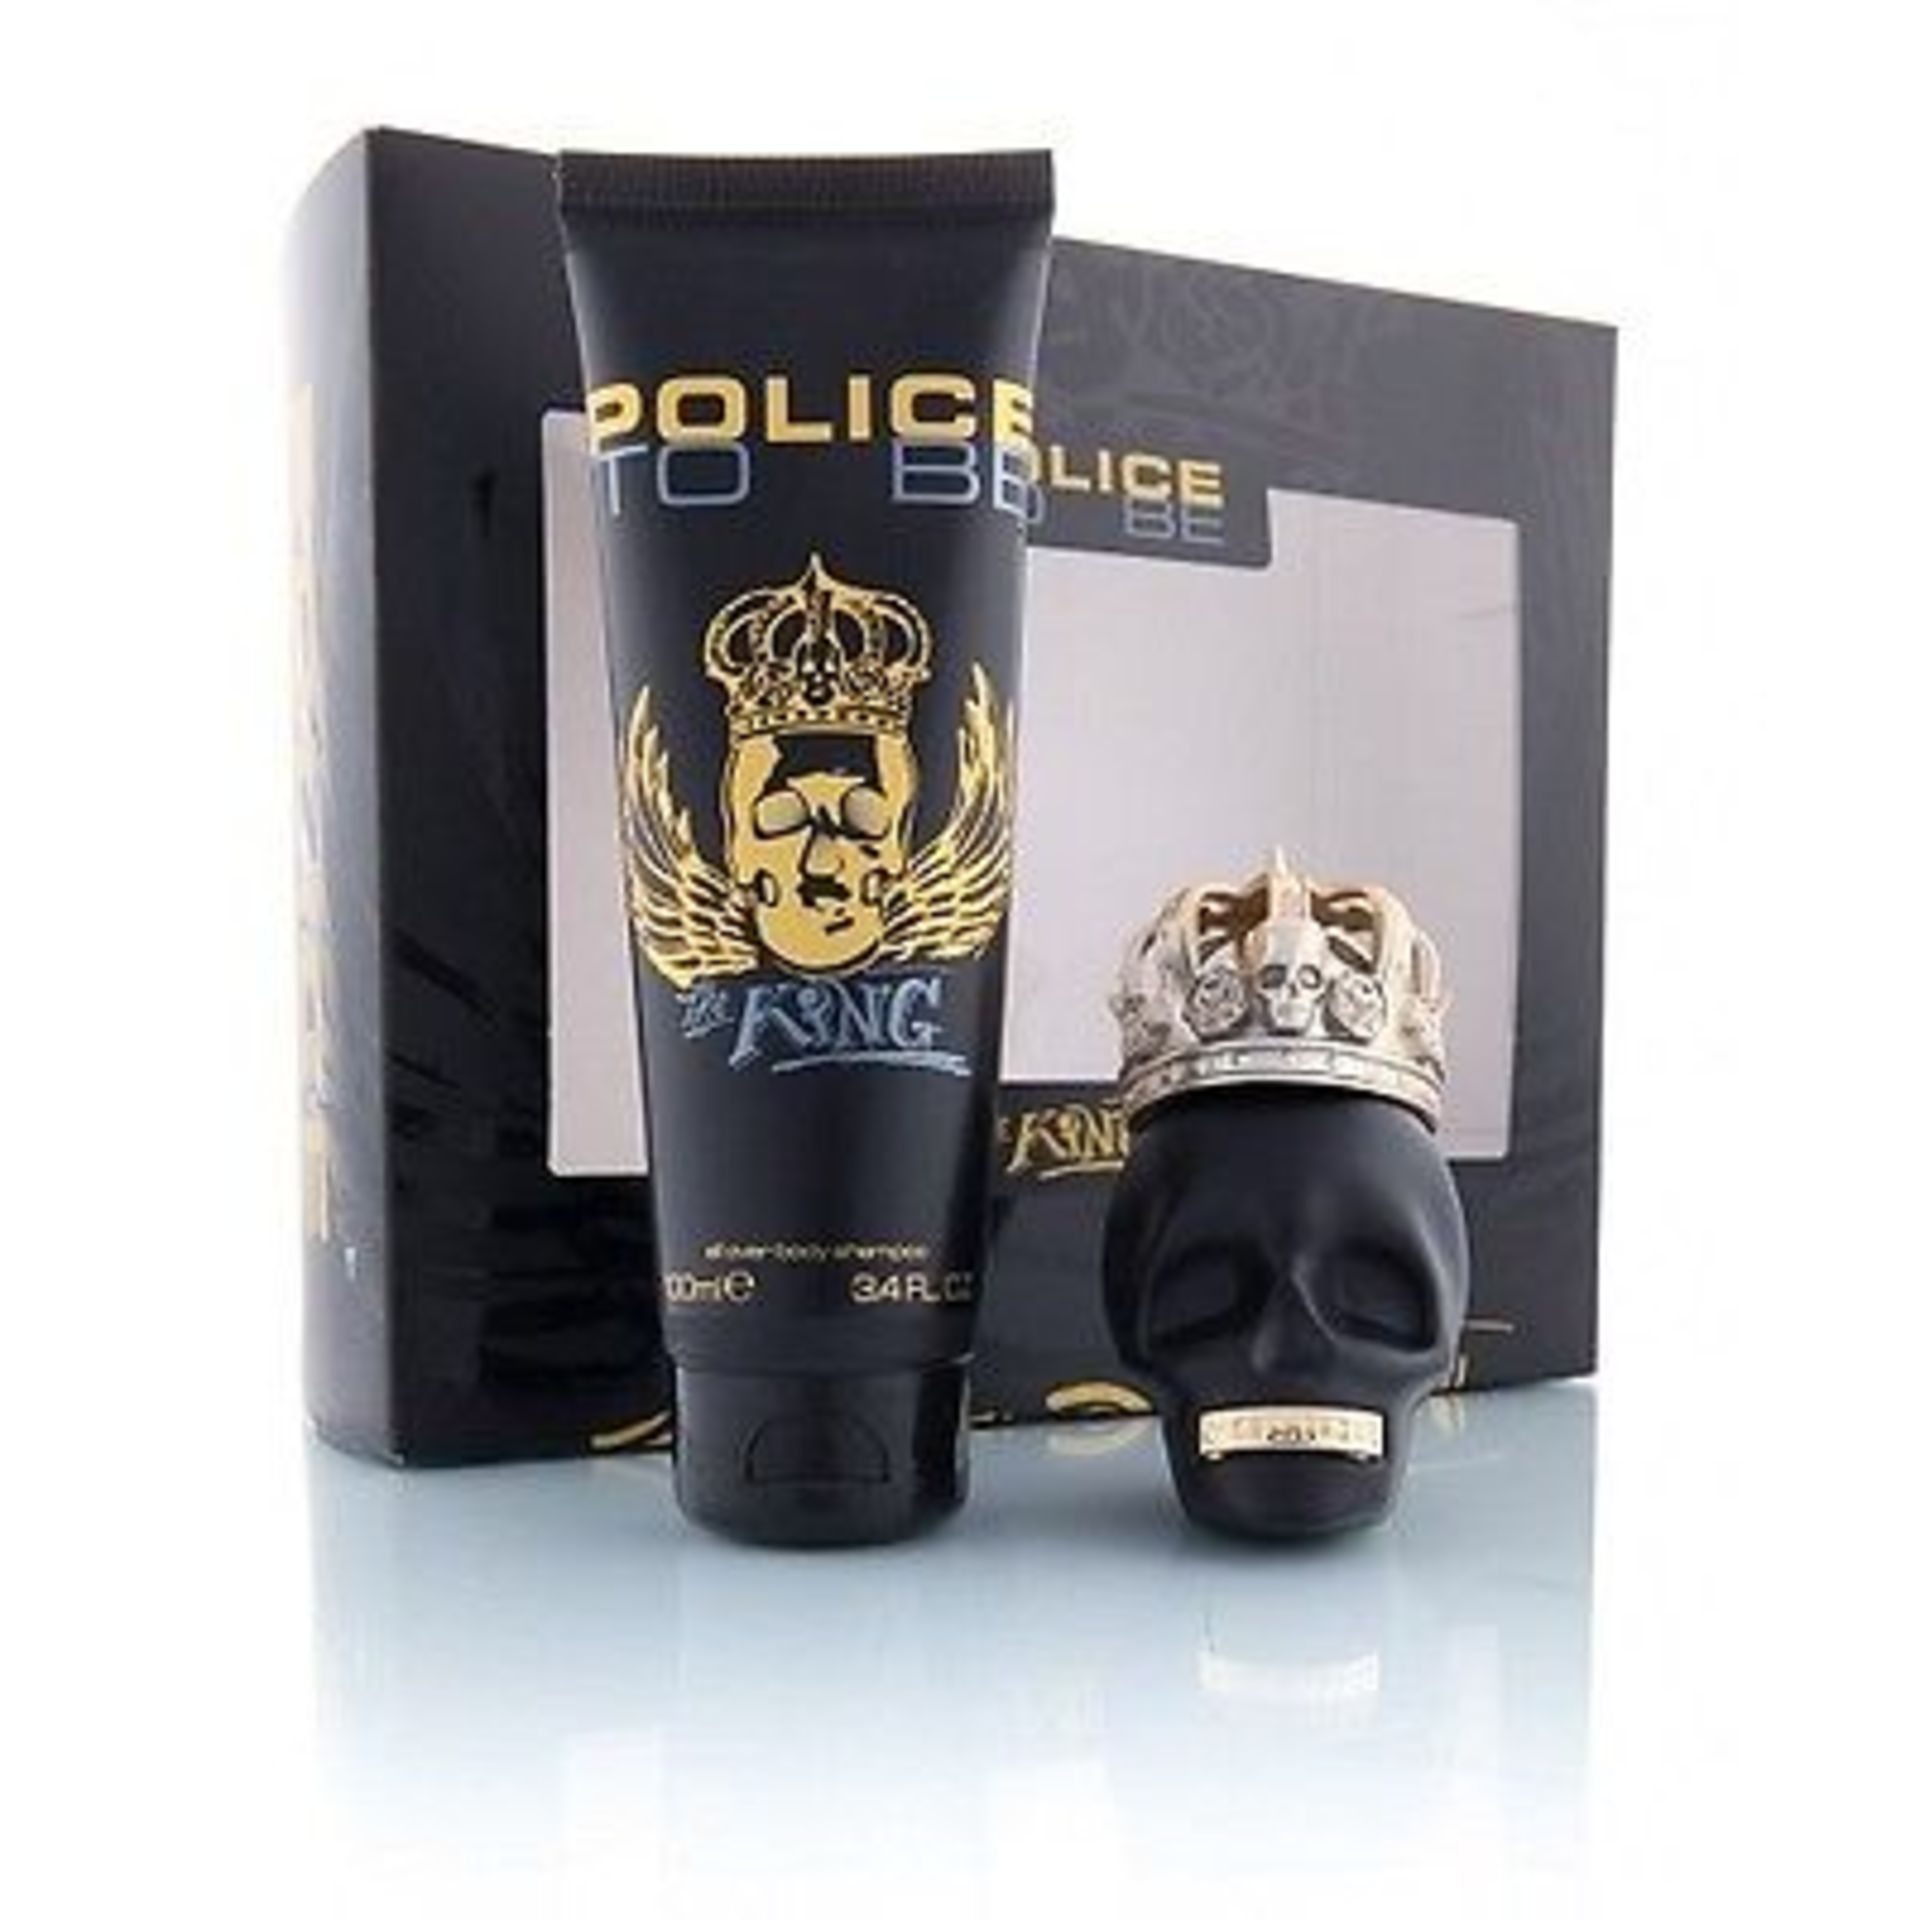 V Brand New Police To Be The King EDT And All Over Body Shampoo For Men RRP19.50